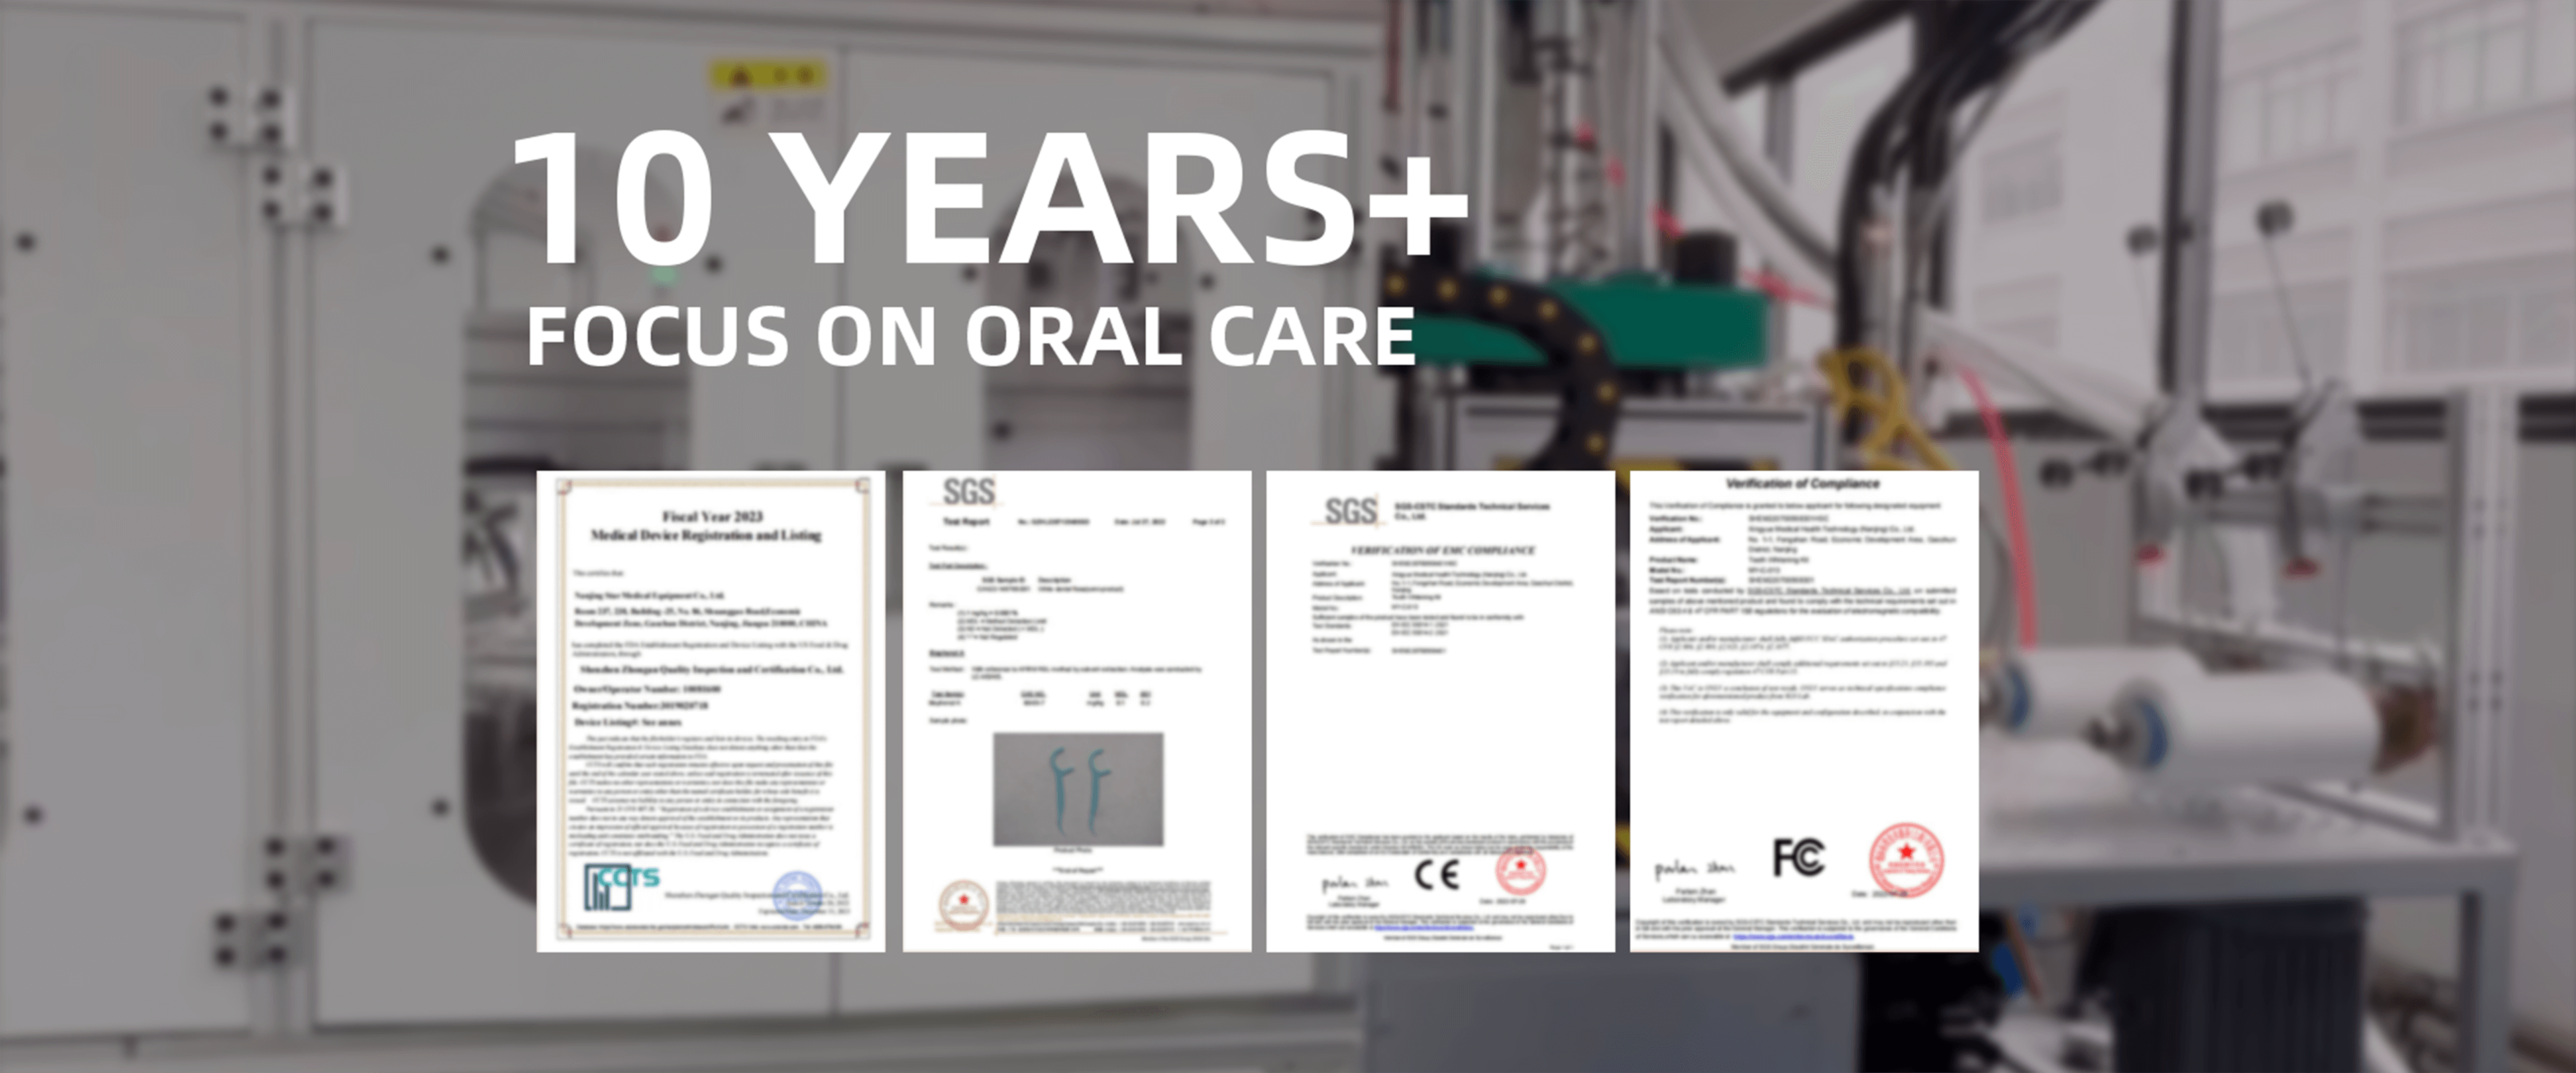 10 years focus on oral care